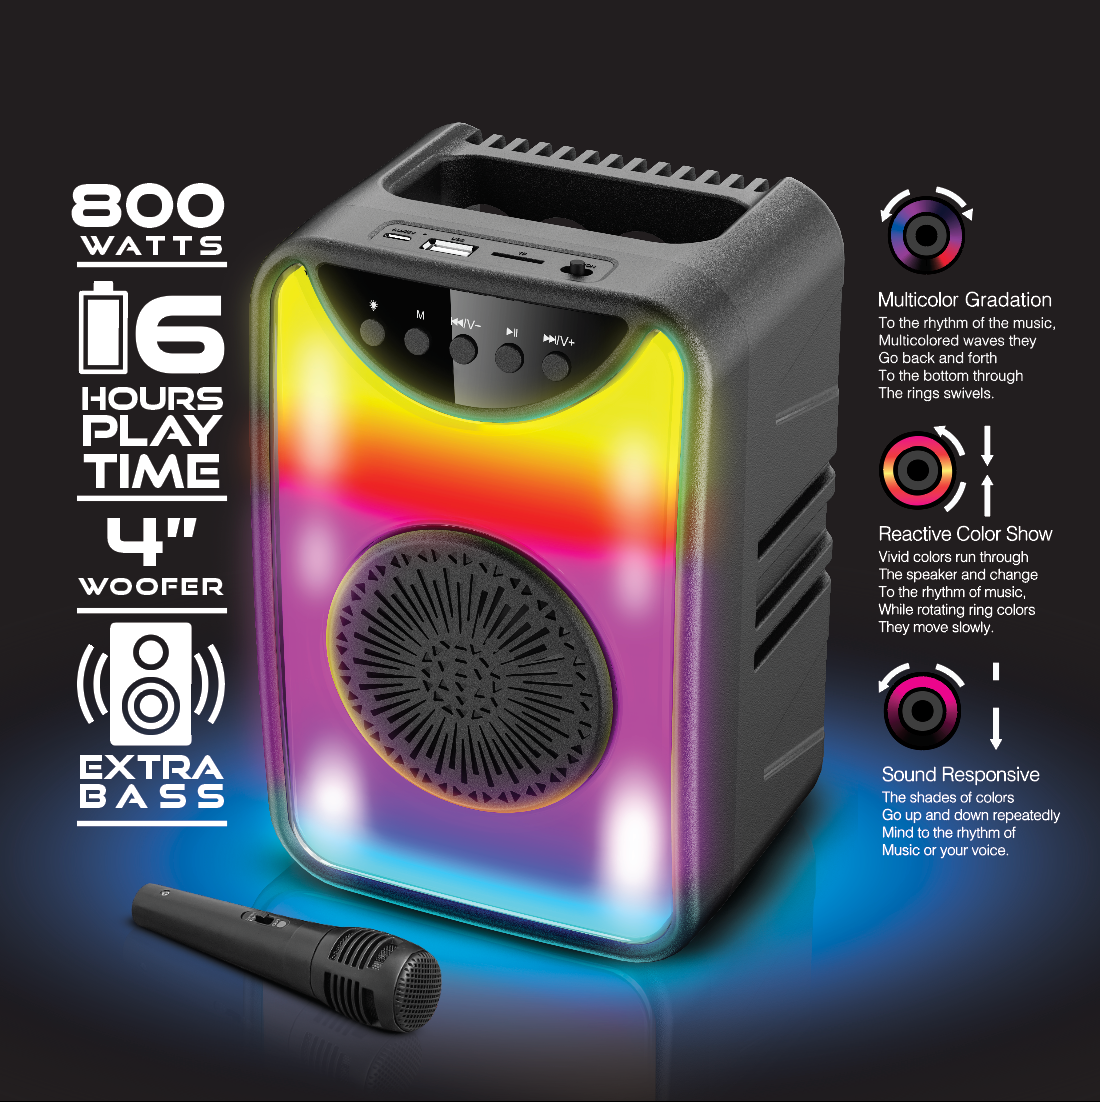 TOPTECH KL-101, 4 Inch Bluetooth Speaker with Vivid Flame Effect Light，Flawless Audio Fidelity with Wireless Micophone, Up to 10 Meters (33ft) Bluetooth Distance, Support for USB/TF Card/FM Radio/AUX ,Rechargeable Long Battery Life for Home, Outdoor